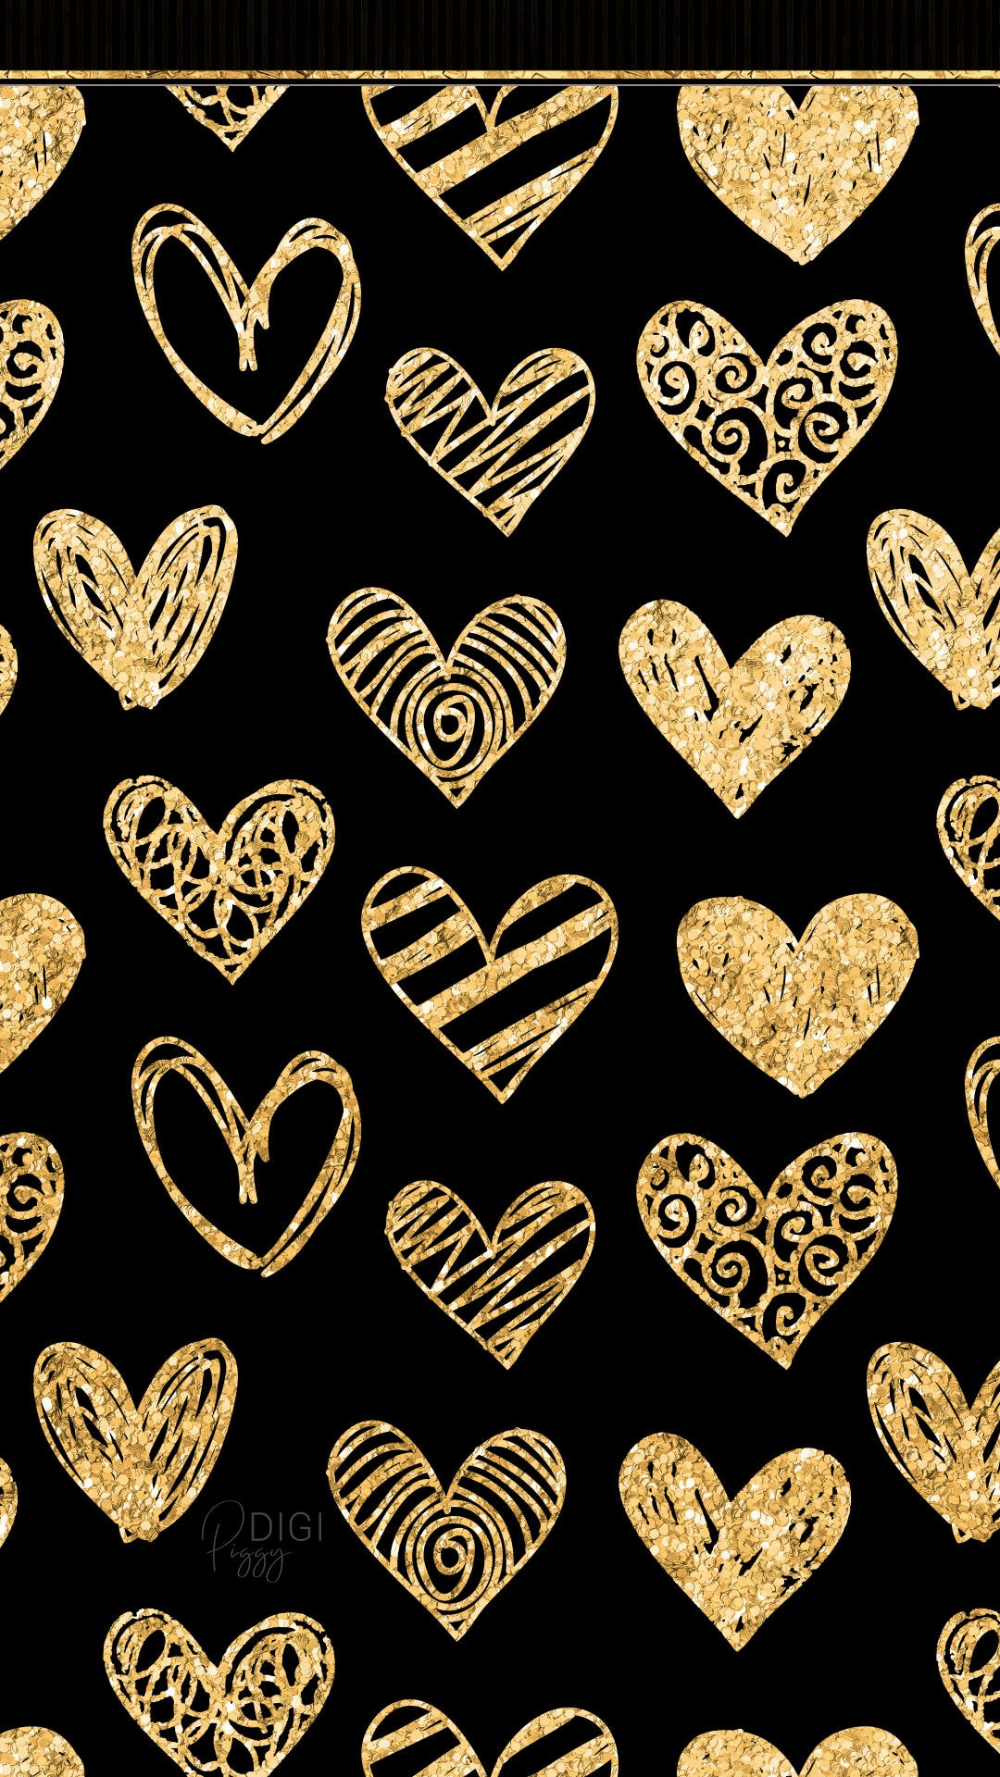 89300 Gold Hearts Stock Photos Pictures  RoyaltyFree Images  iStock  Gold  hearts background Rose gold hearts Pink and gold hearts